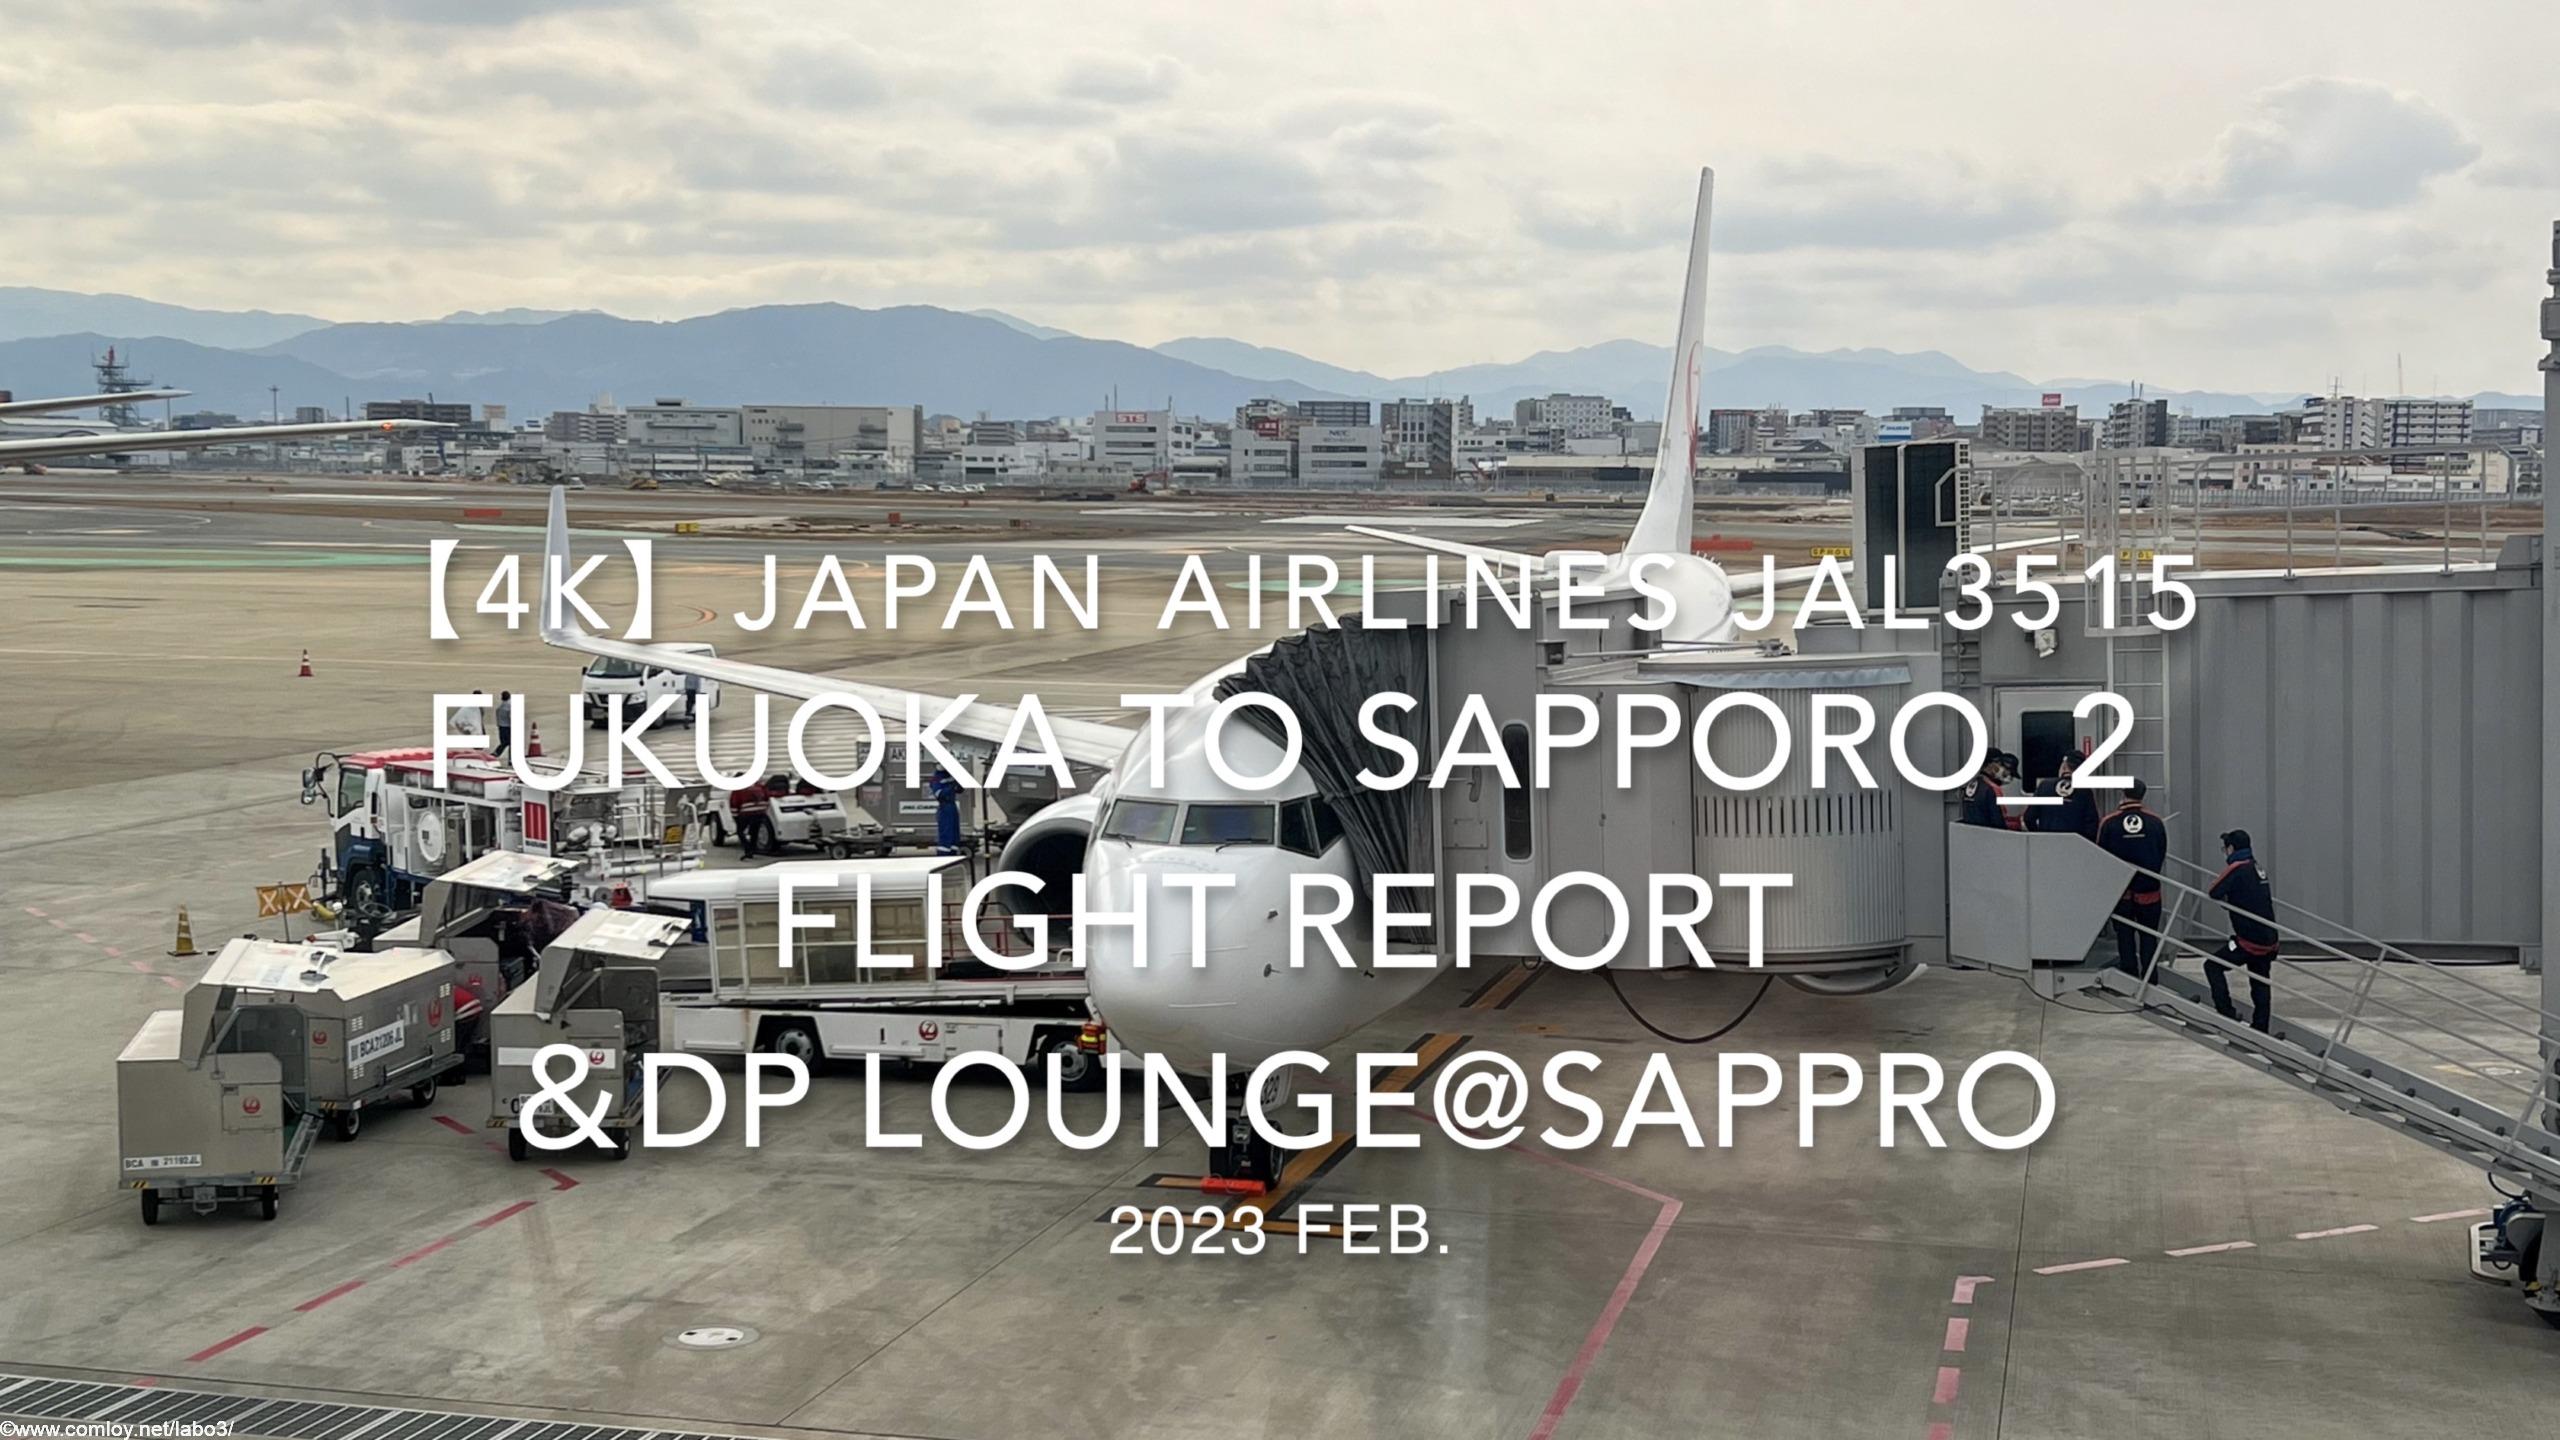 【Flight Report 4K】2023 Feb JAPAN AIRLINES JAL3515 FUKUOKA to SAPPORO_2 and JAL DP LOUNGE 日本航空 福岡 - 新千歳 搭乗記